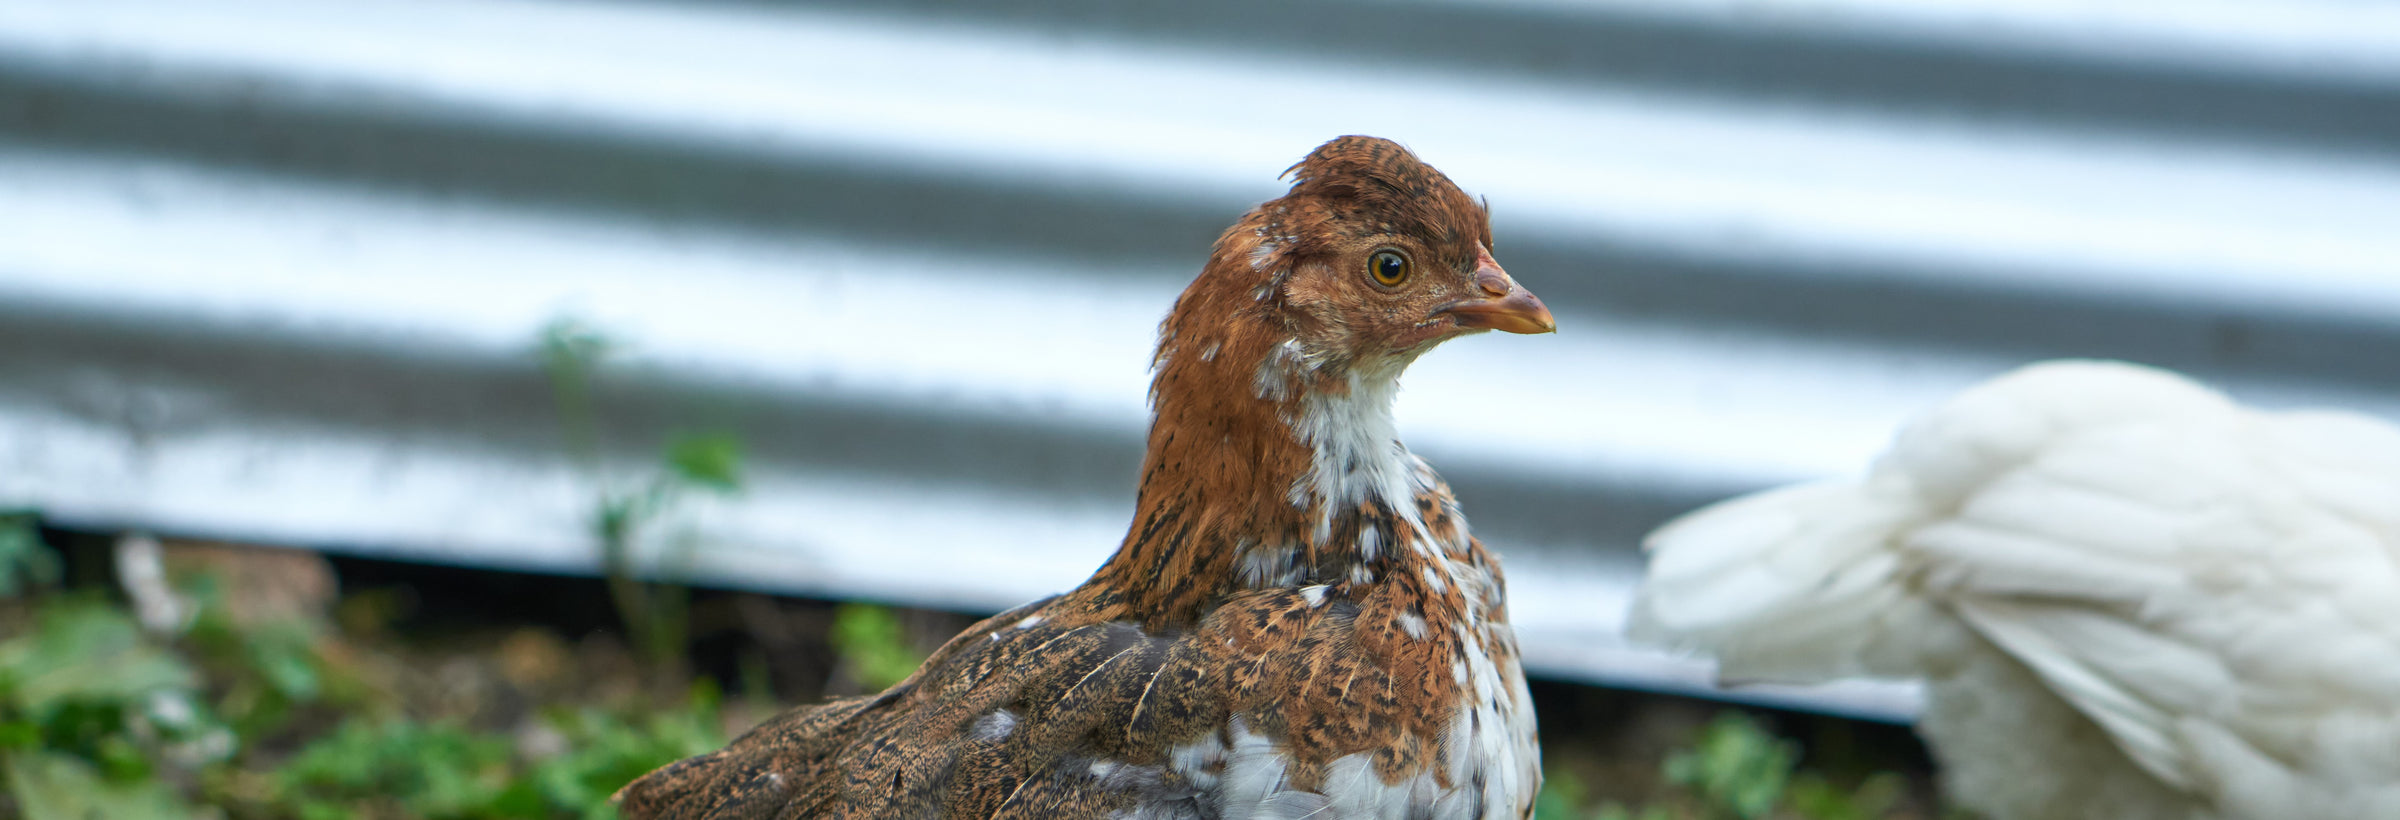 Small brown and white chicken closeup.